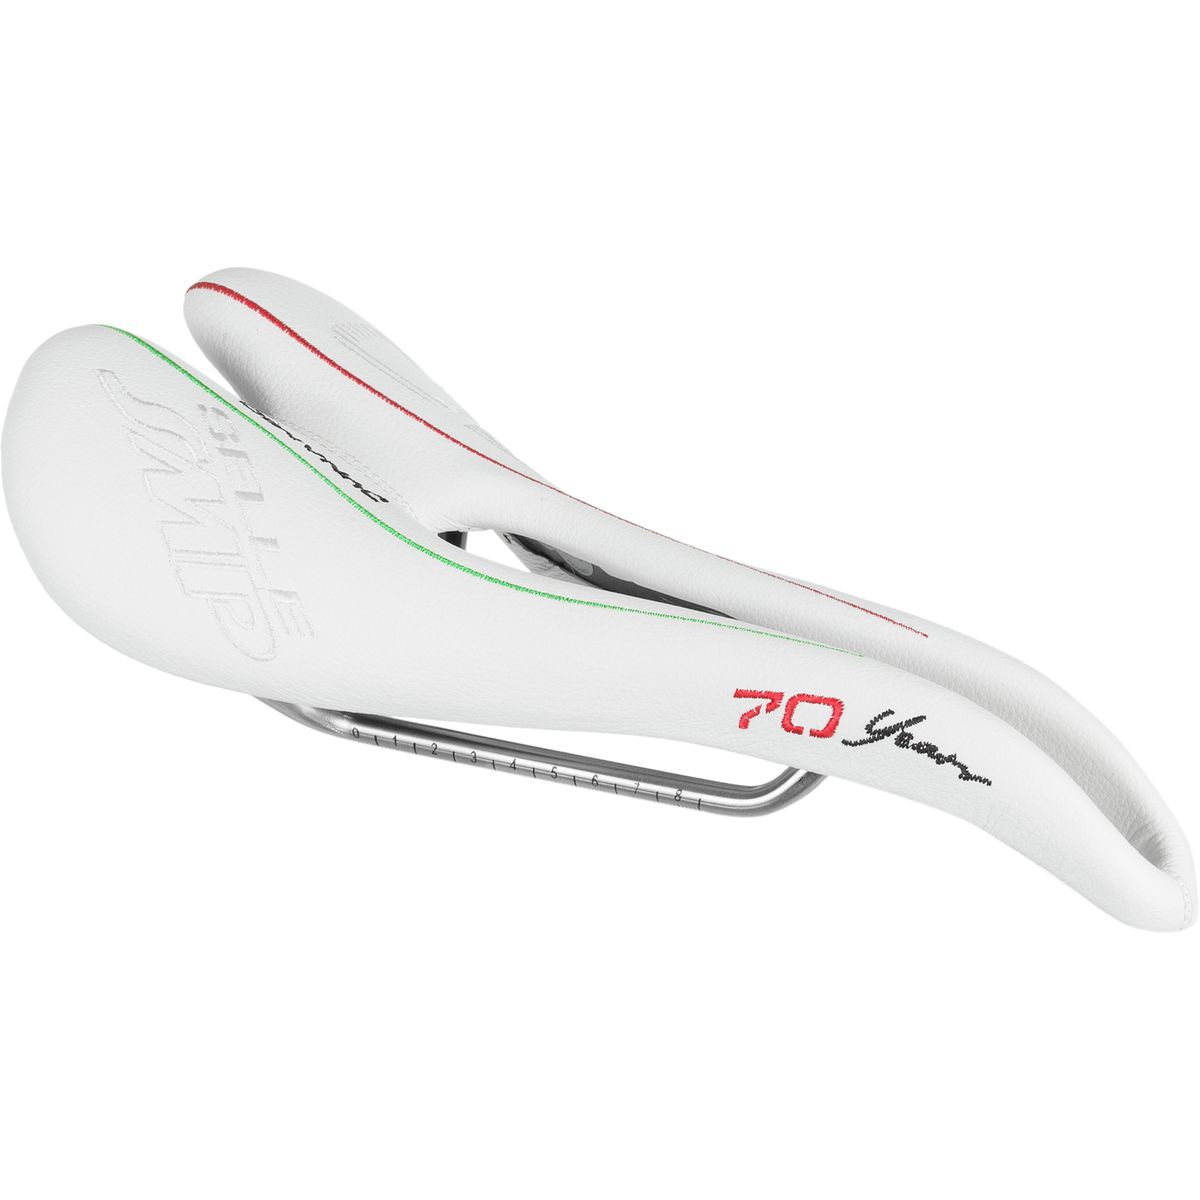 Selle SMP Dynamic 70th Anniversary Limited Edition Saddle